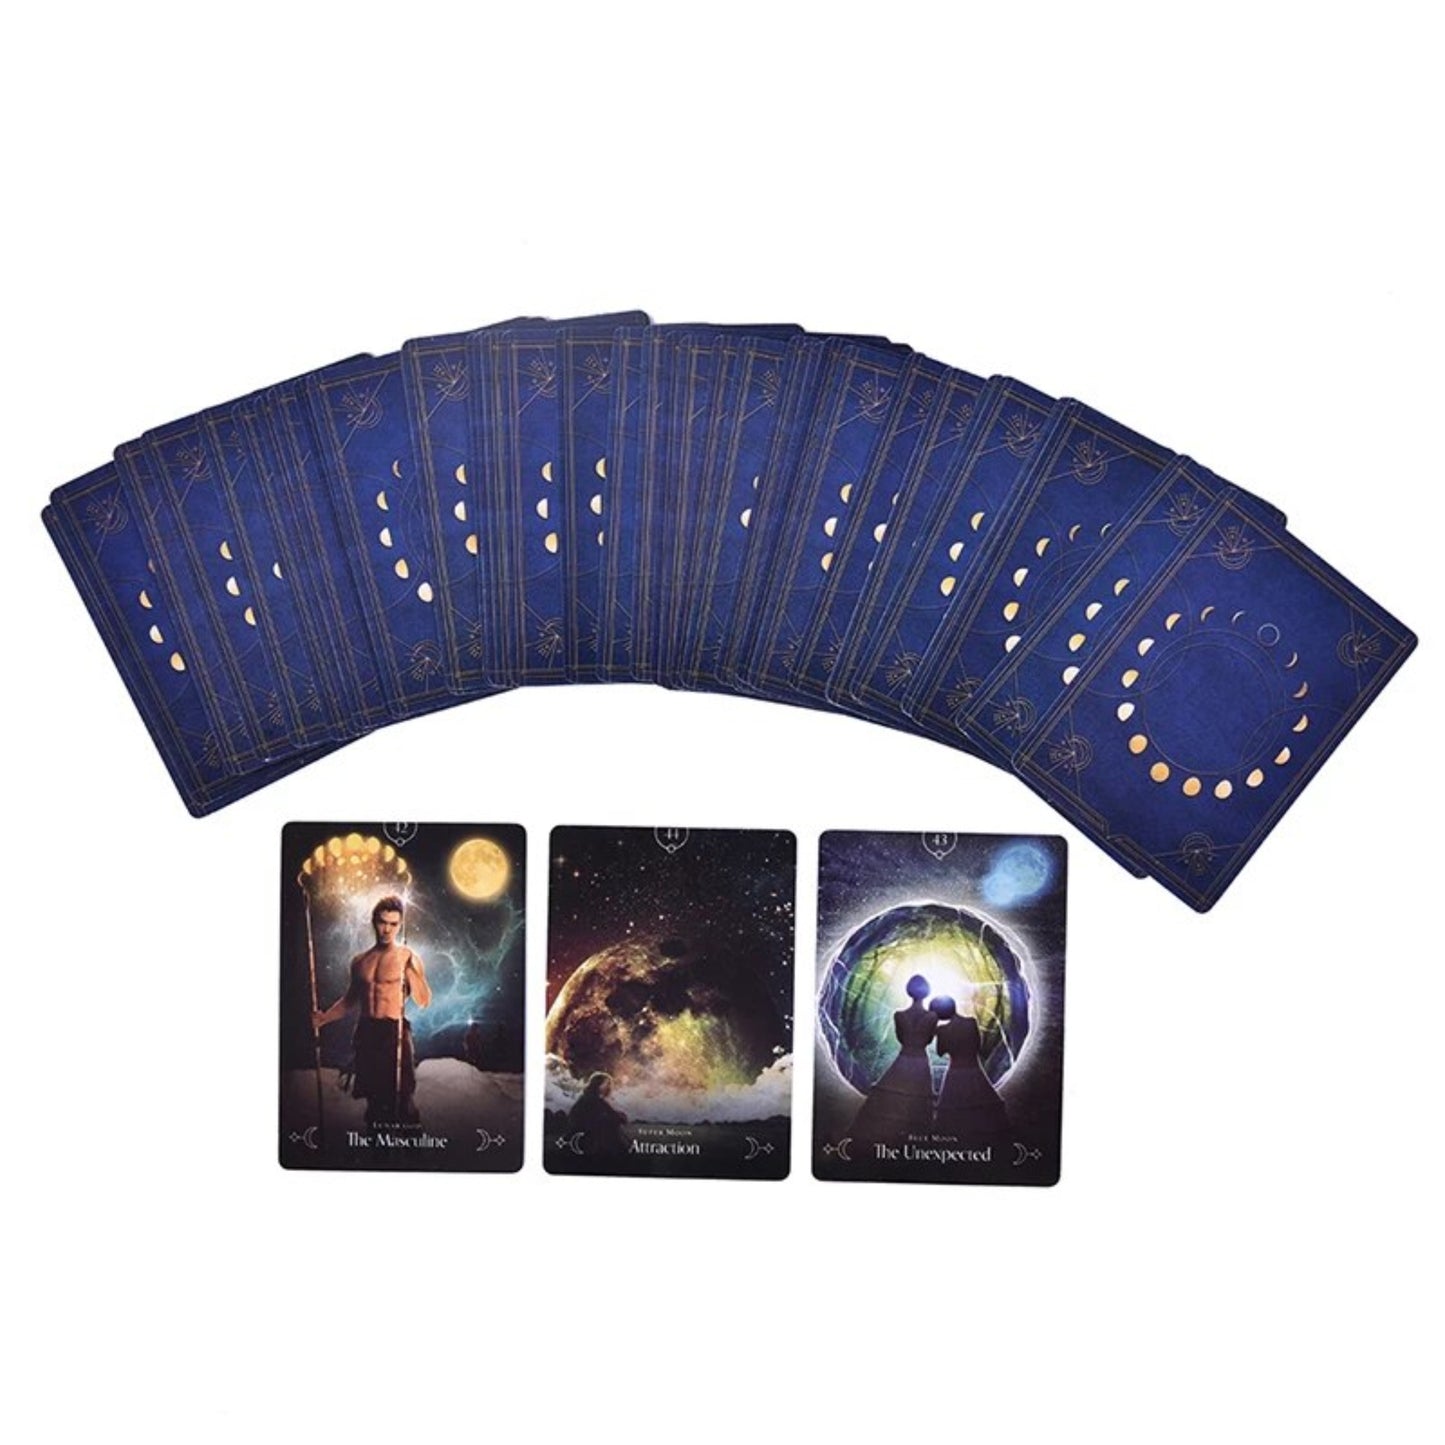 Queen of the Moon Oracle Deck: 44 Oracle Cards and Guidebook